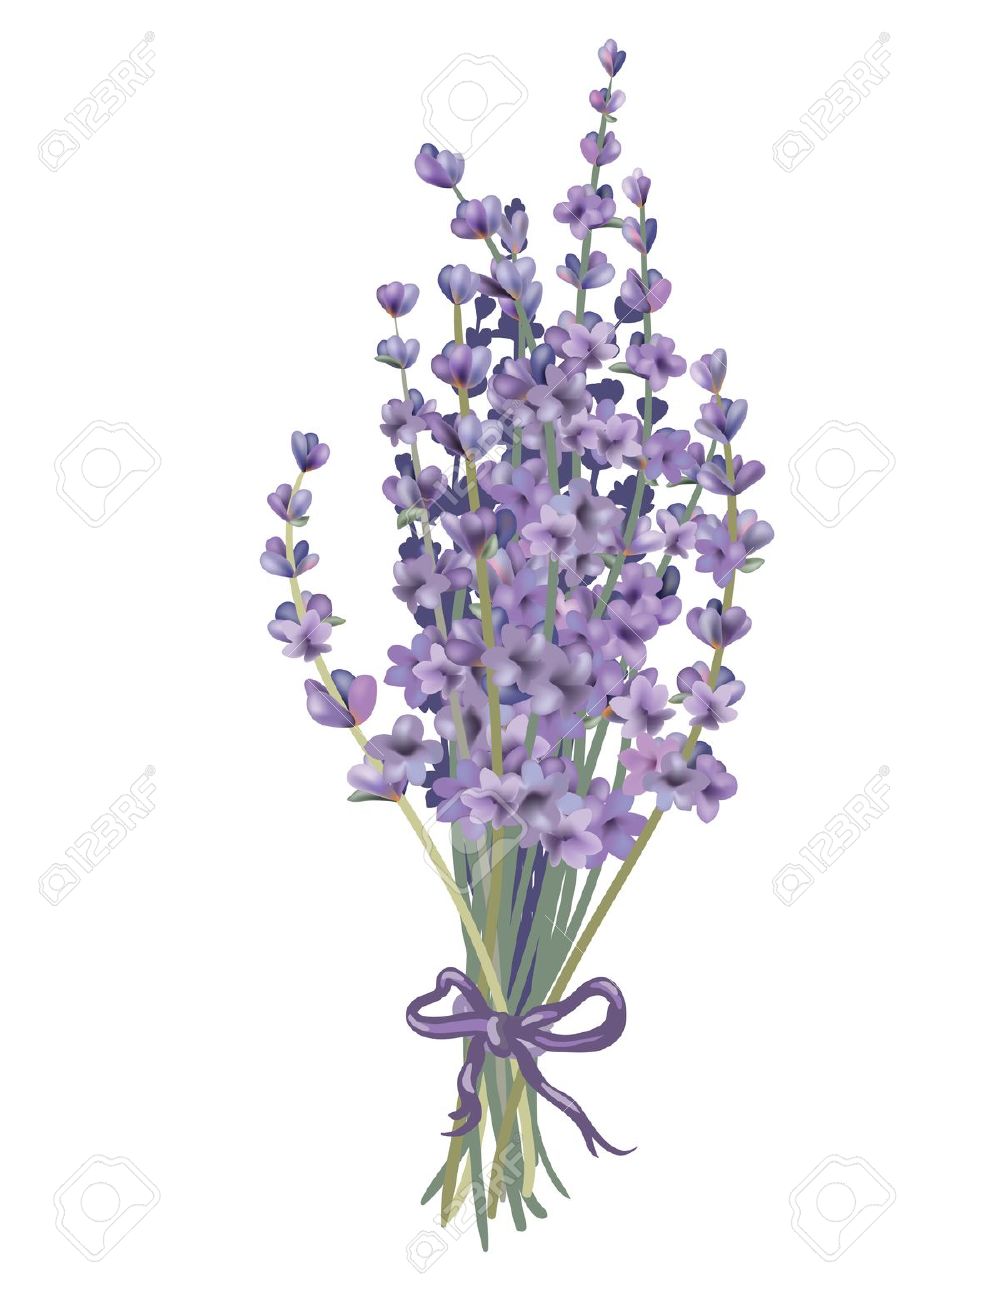 Lavender Images & Stock Pictures. Royalty Free Lavender Photos And.